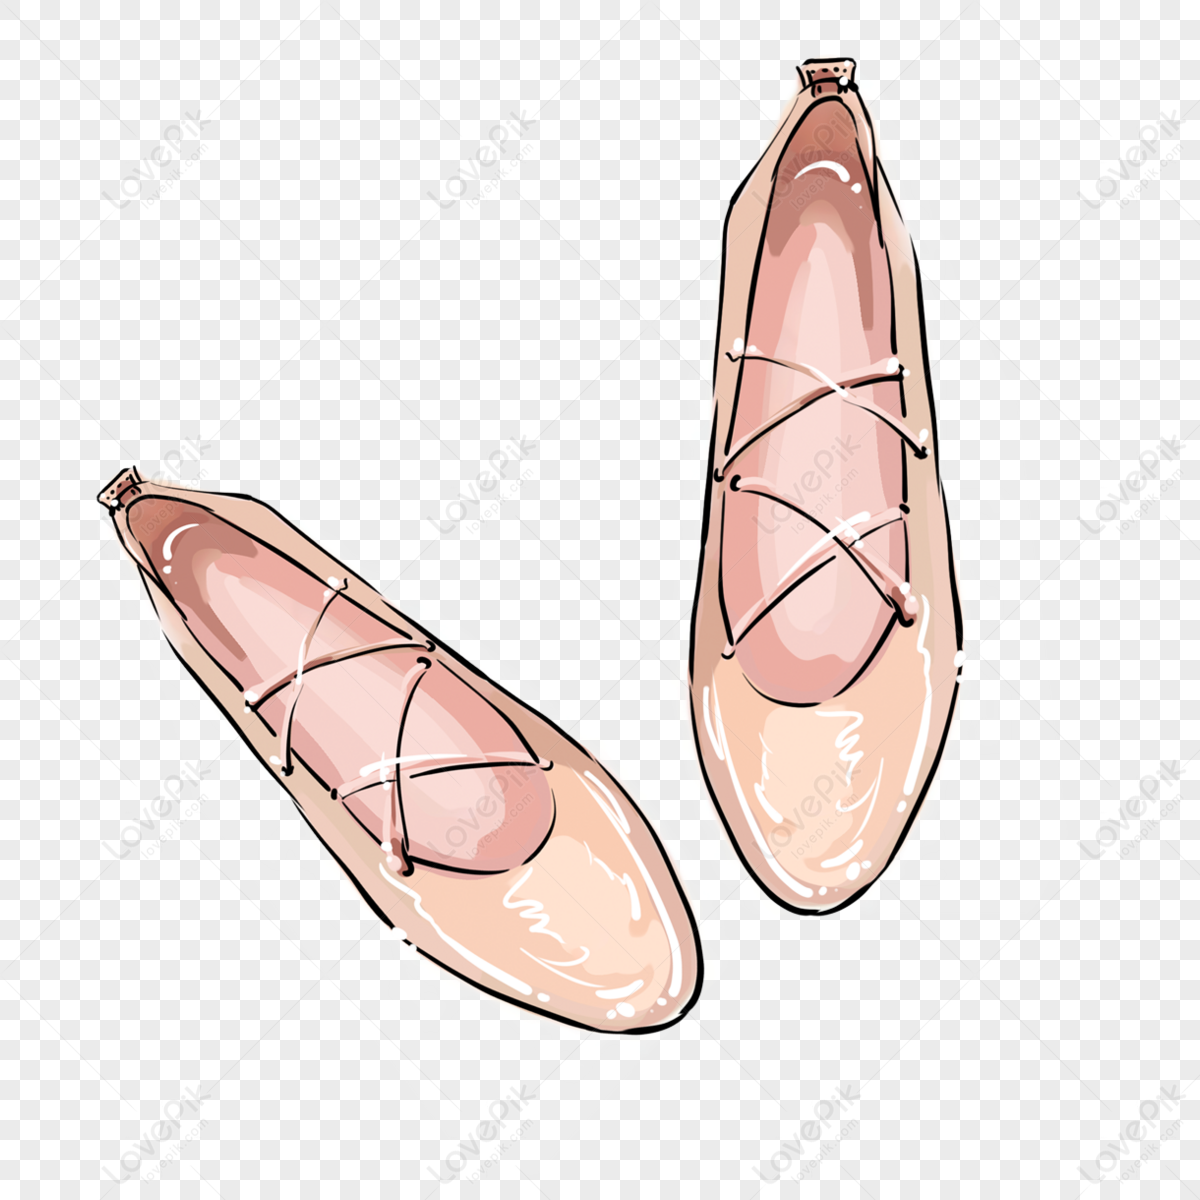 Ballet Shoe Clipart Transparent PNG Hd, Pink Ballet Shoes Clipart, Ballet  Shoes Clipart, Ballet Shoes, Clipart PNG Image For Free Download